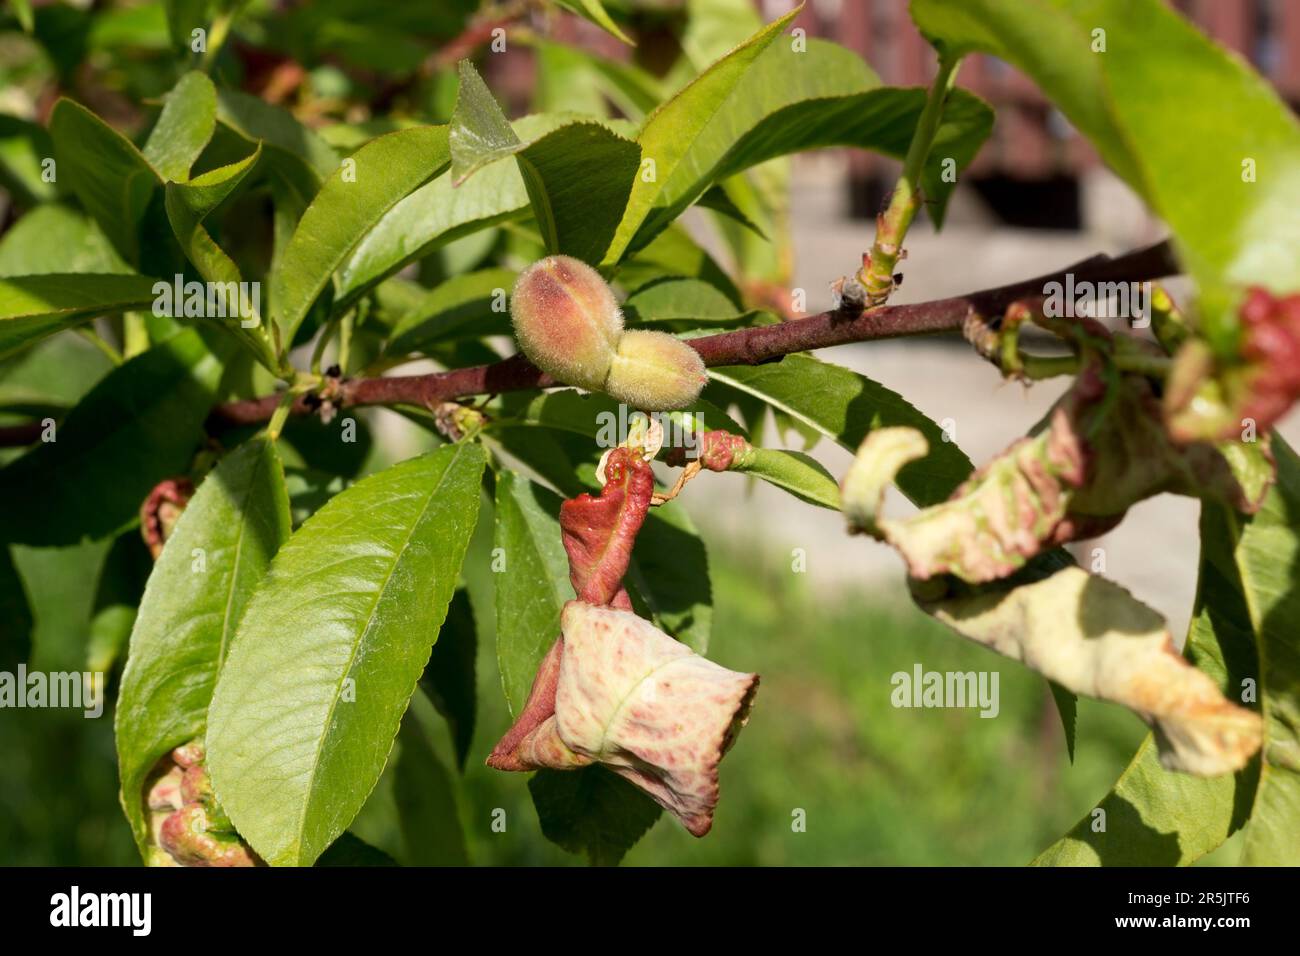 Peach tree disease. Branch of a peach tree with leaf curl caused by a fungus Taphrina deformans. Stock Photo